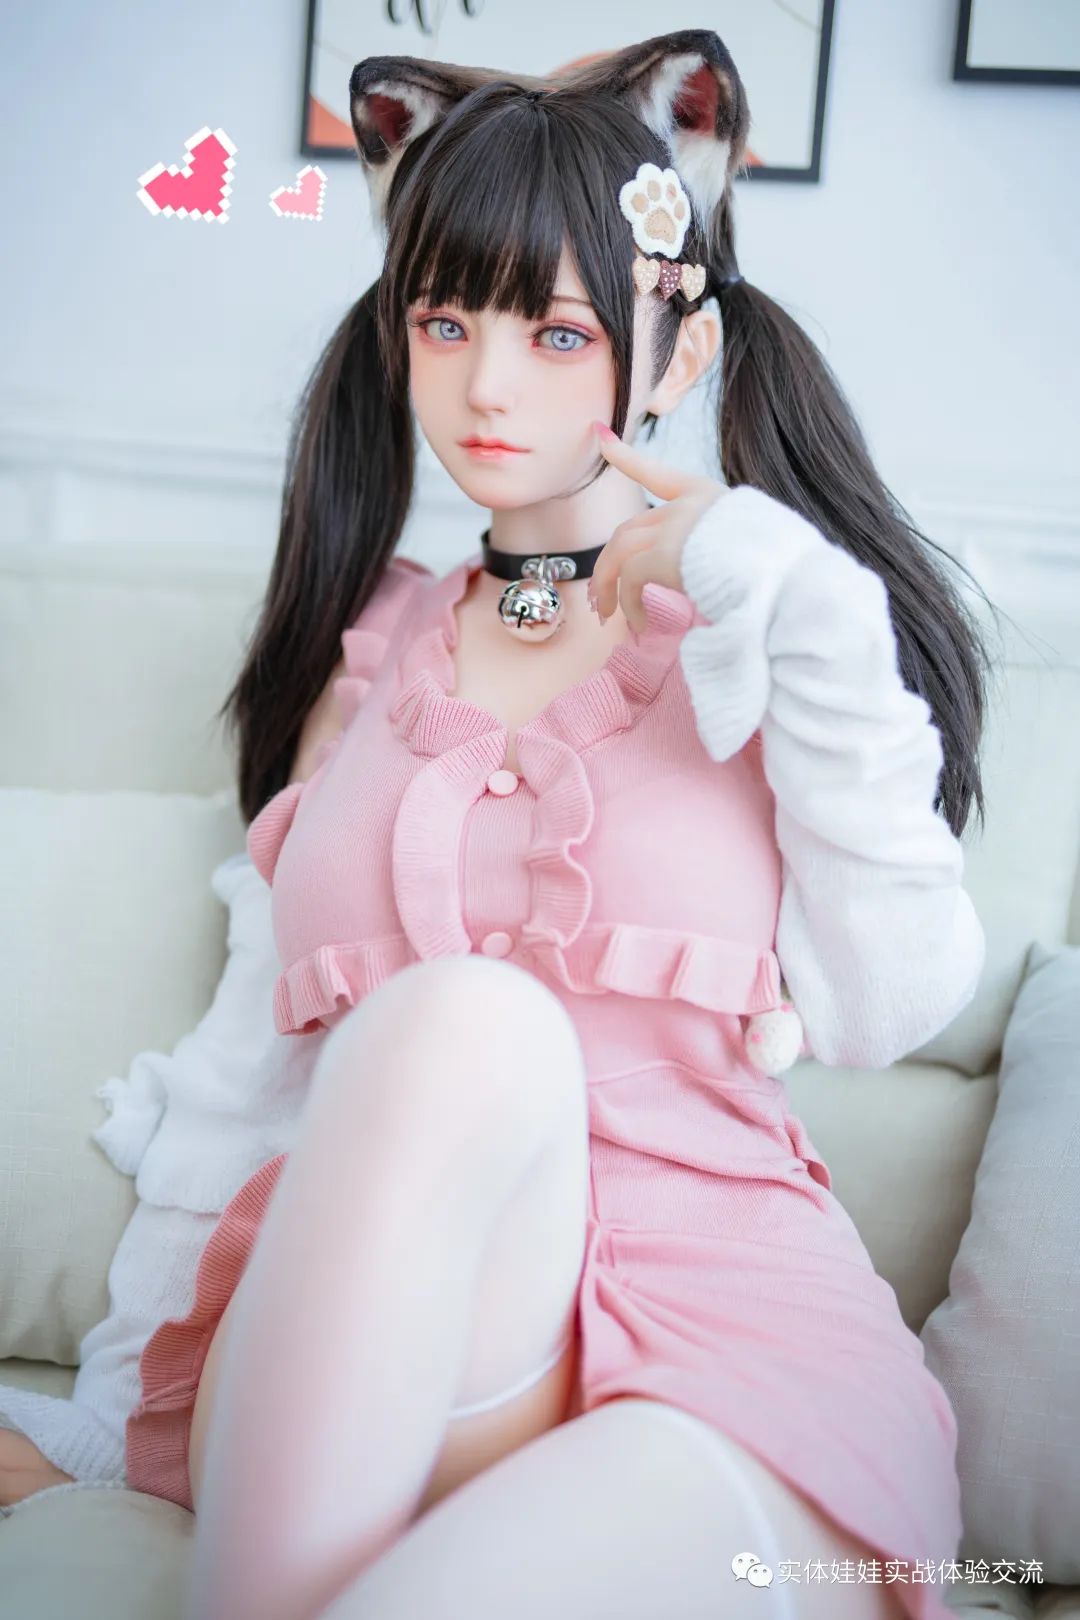 How to choose a real doll?